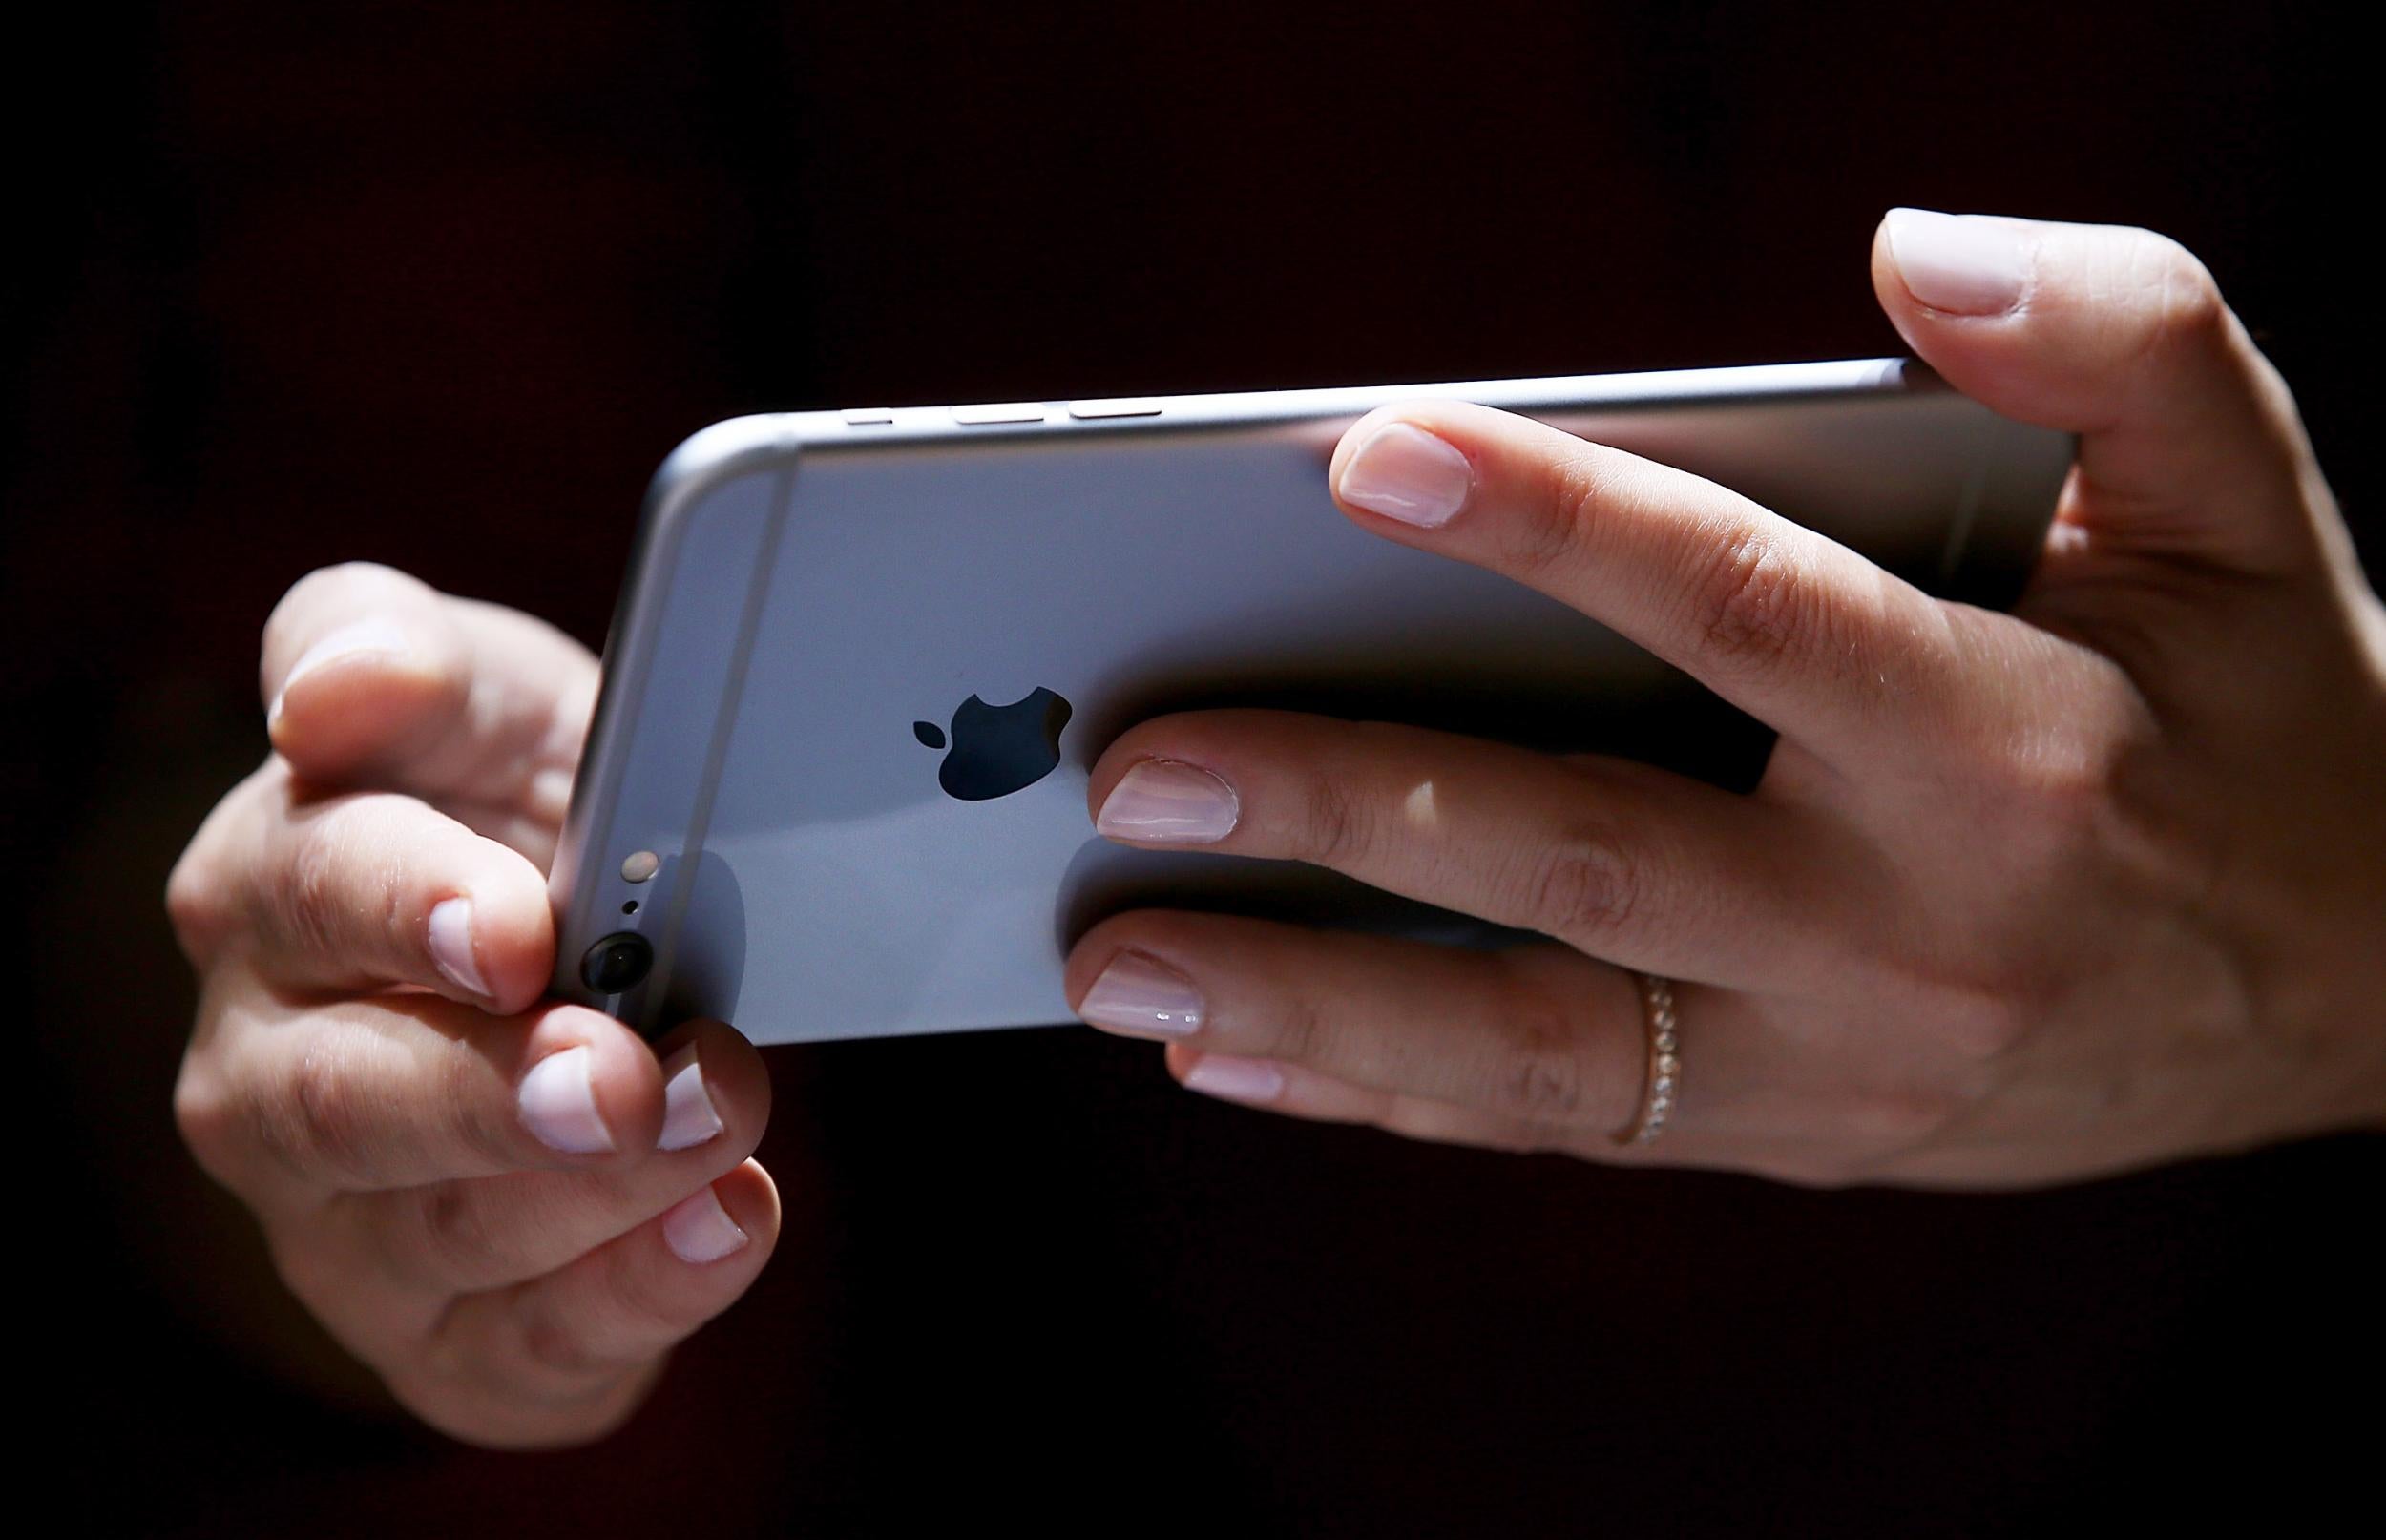 A member of the press uses the iPhone 6 at its launch event on September 9, 2014